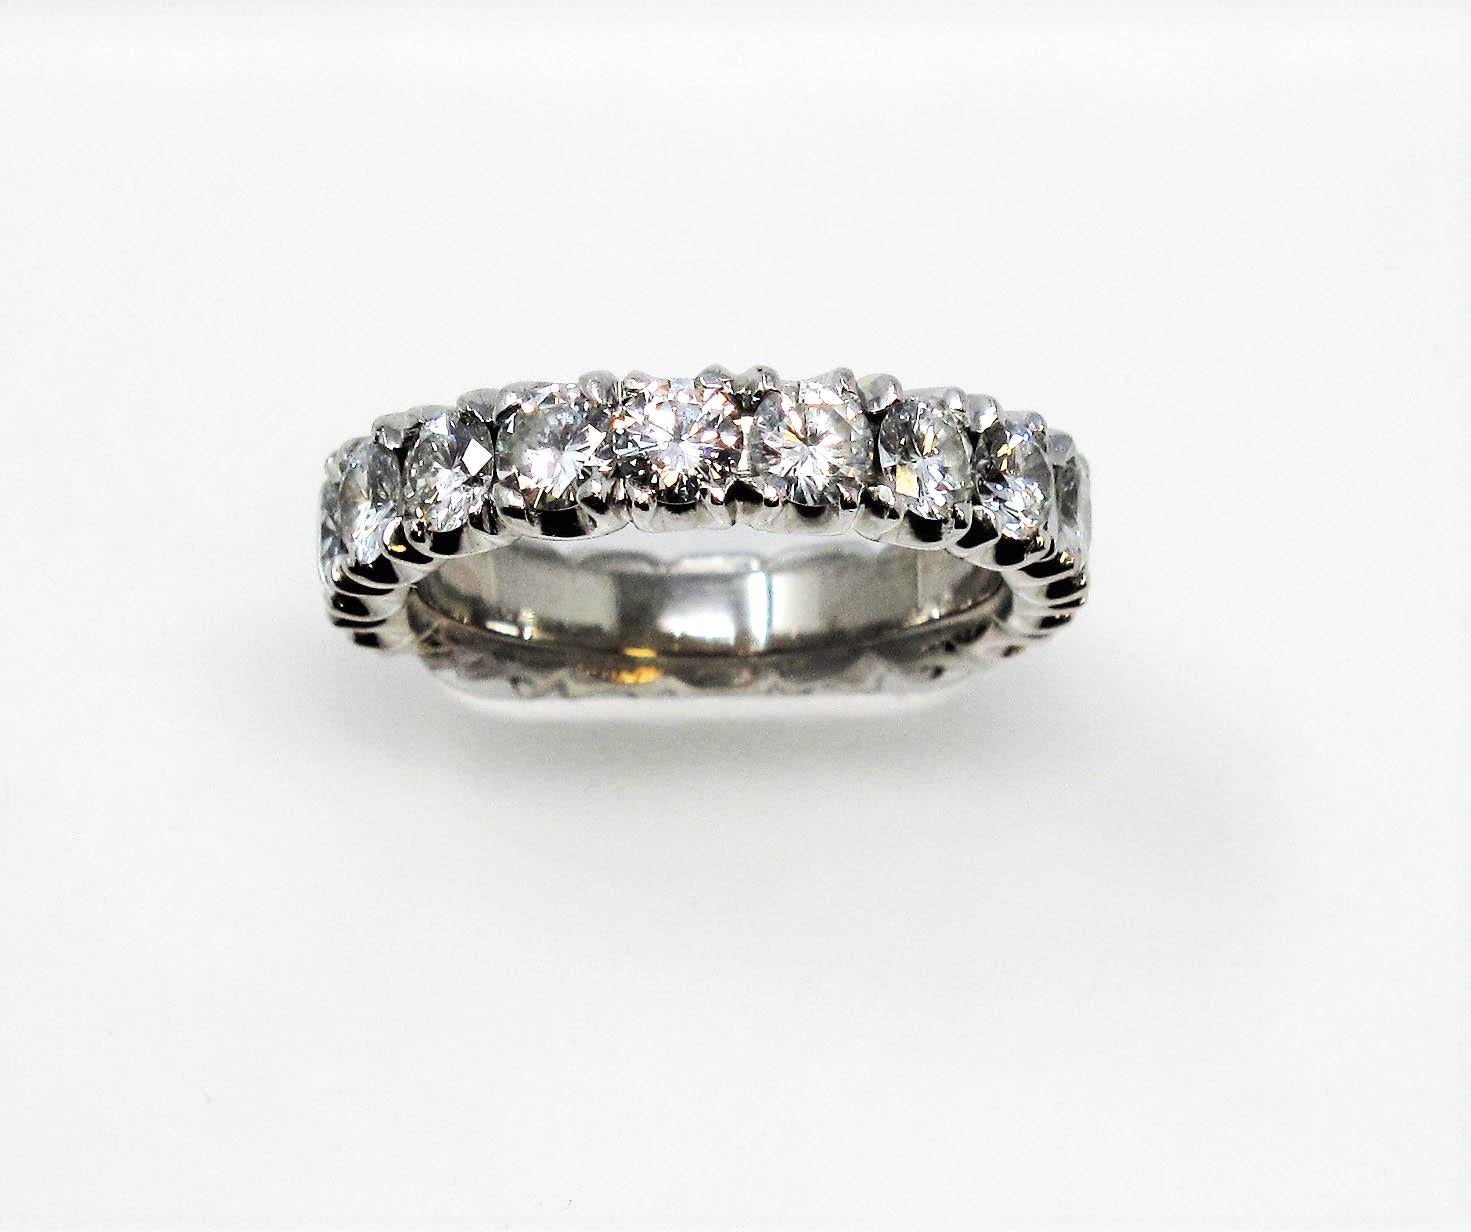 4.25 Carat Total Round Brilliant Diamond Eternity Band Ring in Platinum Size 9 For Sale 2